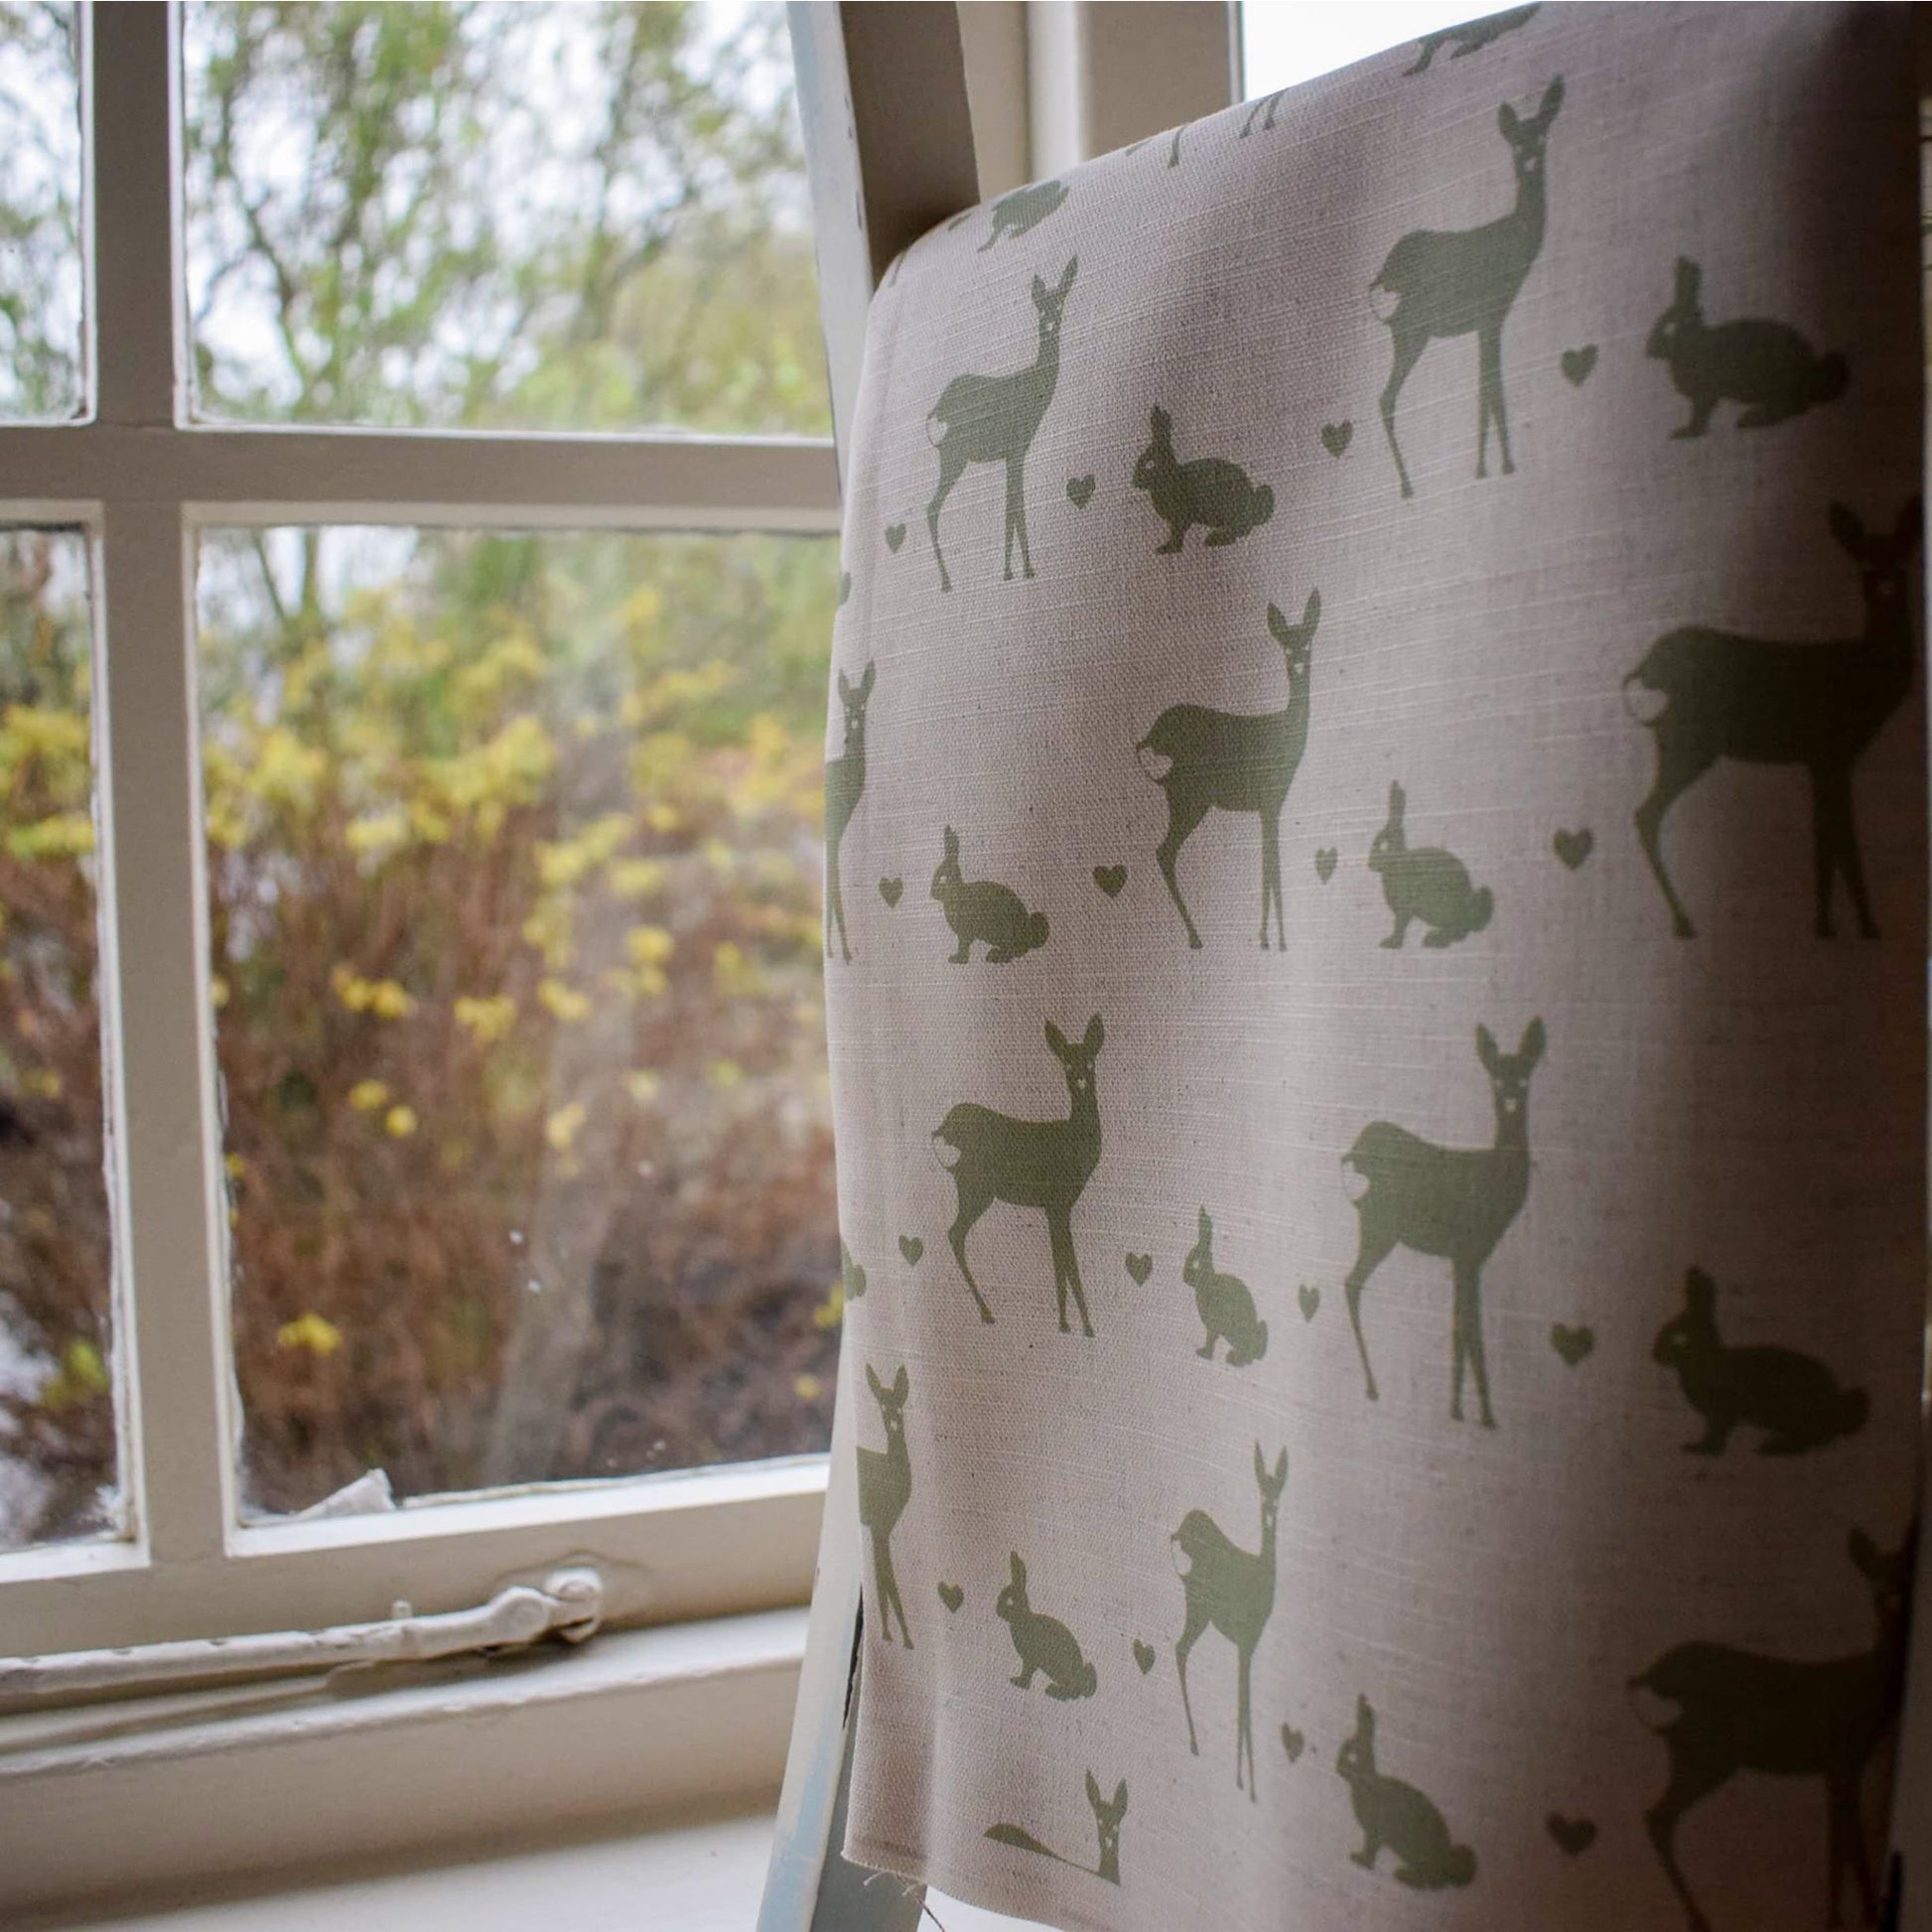 Roe Deer and Rabbit Print Fabric - Hovingham Green - Desgined by F&B in Hovingham - Yorkshire Based Interiors